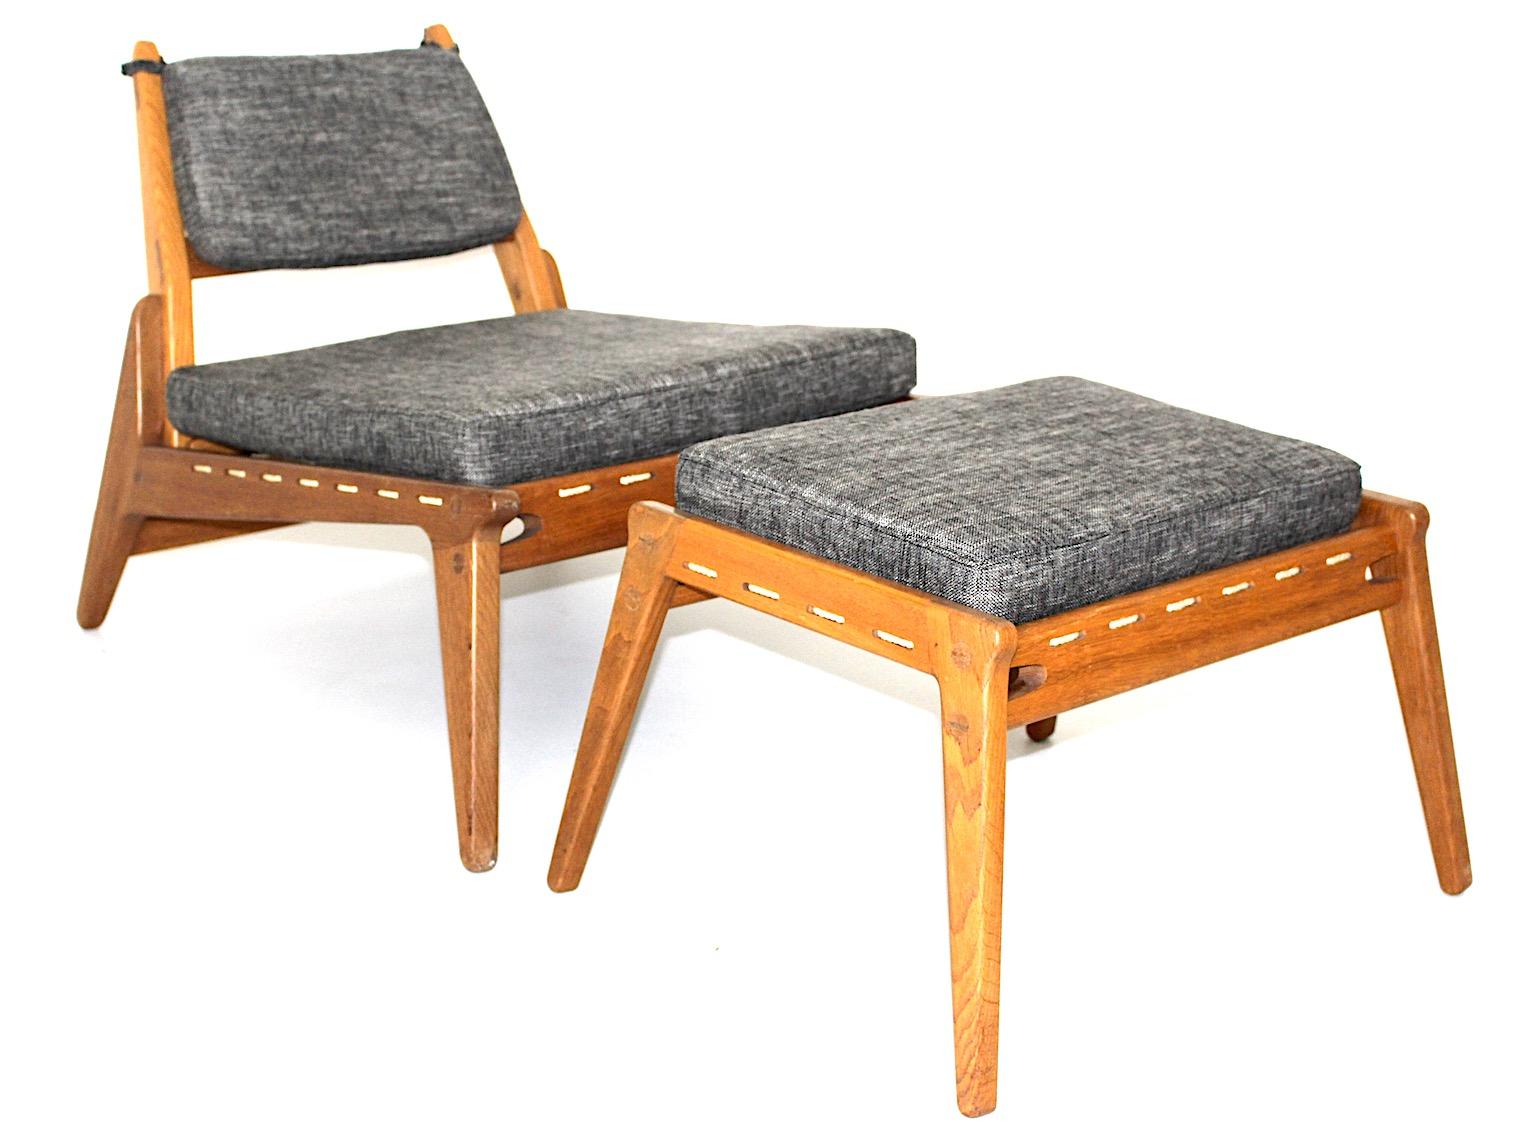 Mid Century Modern vintage freestanding organic lounge chairs or easy chairs with ottoman pair duo from solid oak and grey fabric circa 1960.
A fantastic duo of lounge chairs with ottoman with organic and sleek attributes. 
While the oak wood frame